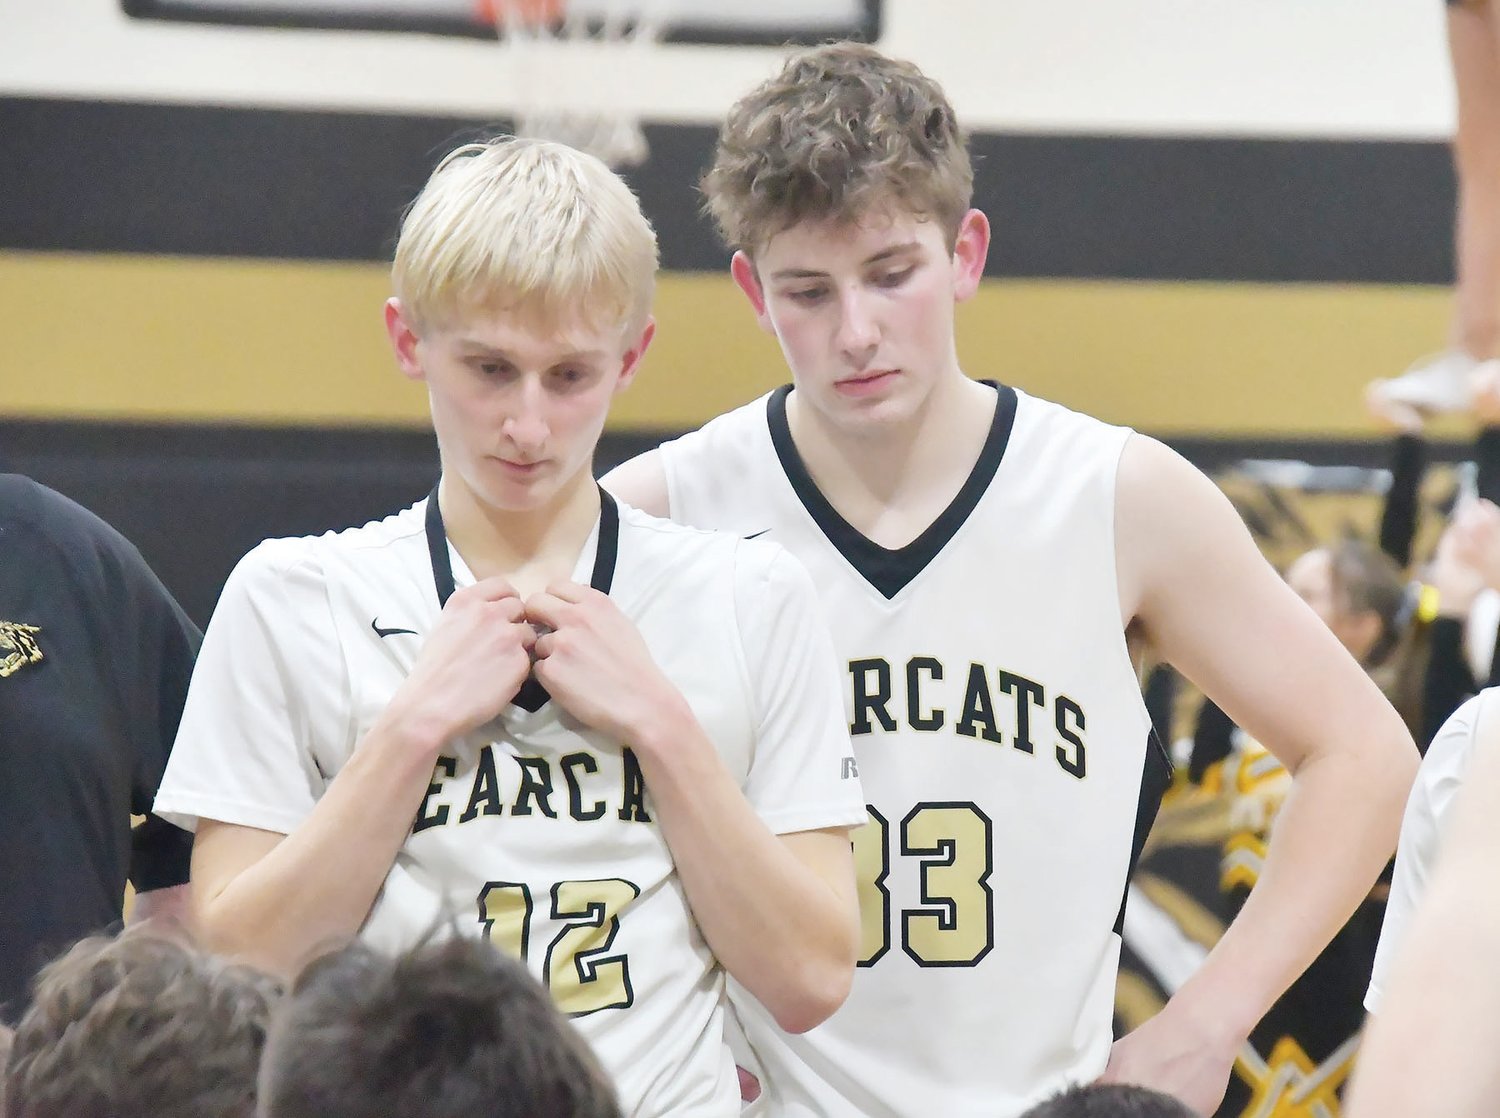 Logan Luecke (left) and Bryce Chrisman listen as head coach Nic Zenker talks during a timeout in last Thursday's game.